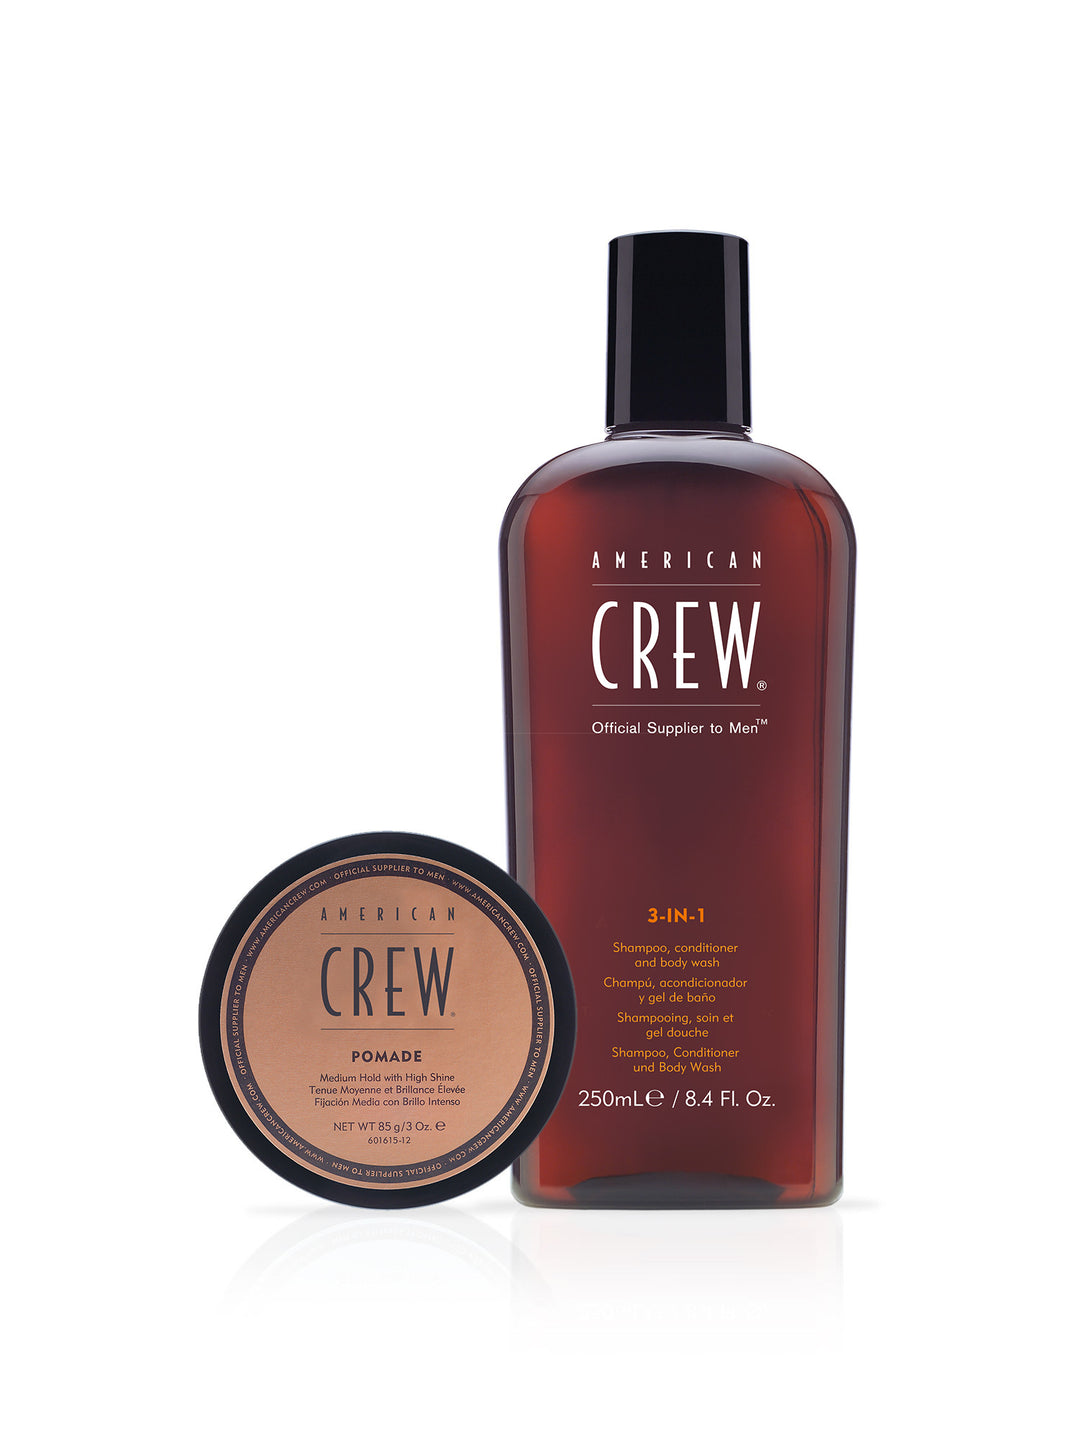 Gel, Pomade, American Crew Cream, Hair Products Hair Styling - and